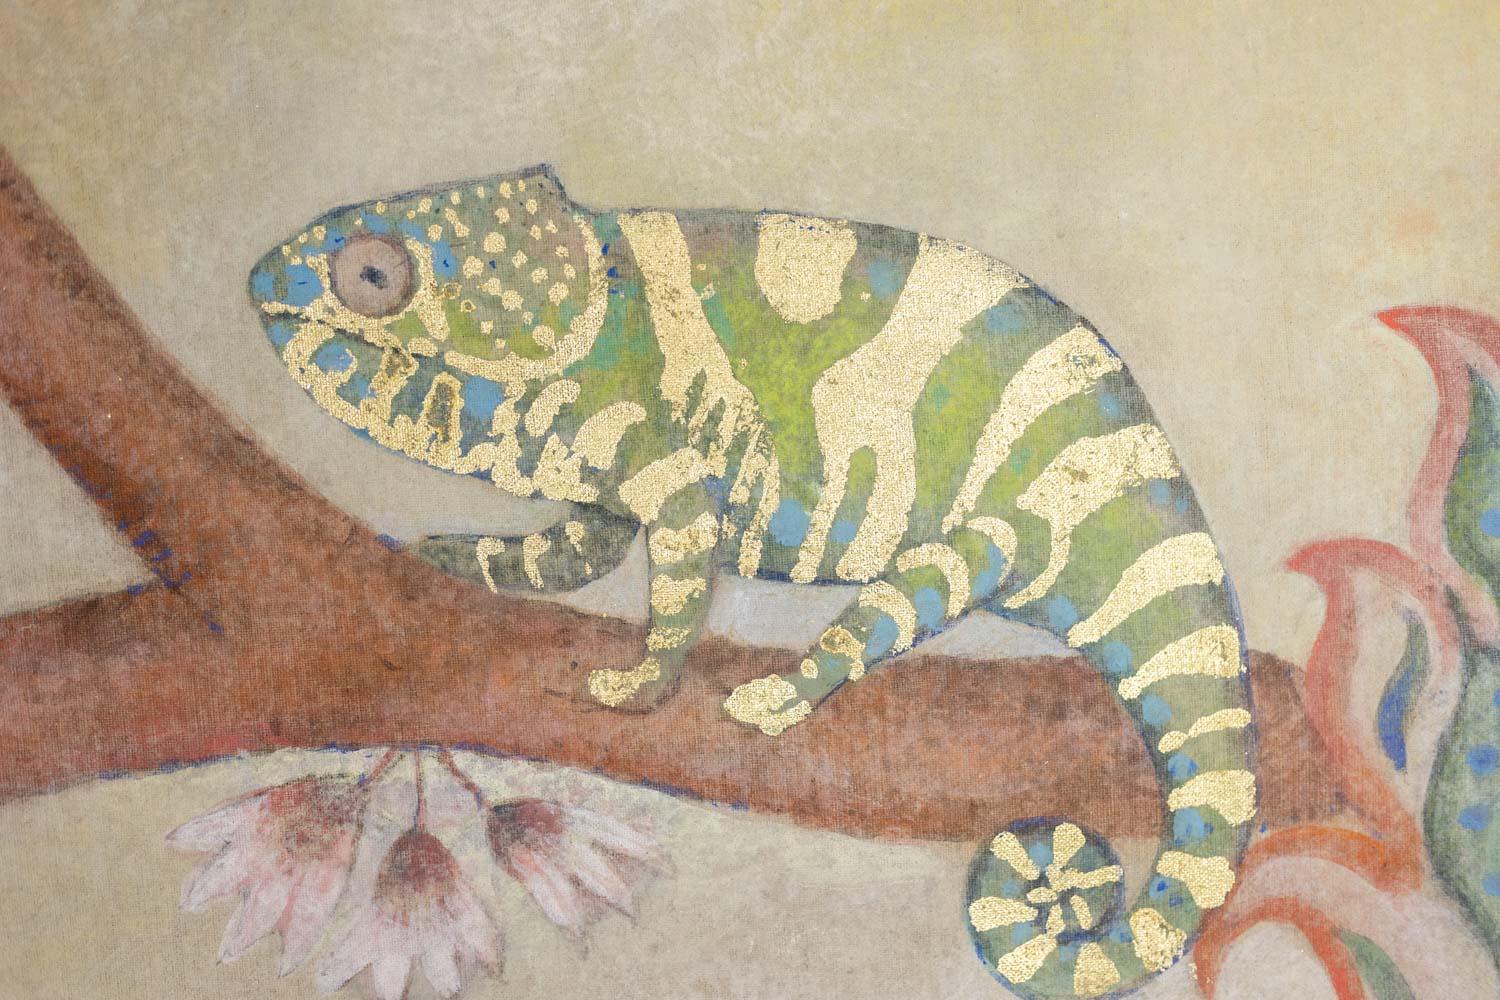 Painted canvas or decorative panel representing a chameleon on its branch, on the right, with a foliage and stylized background in blue and pink tones. We can see a small fan with arabesques or scrolls to the right of the composition.

Reference: